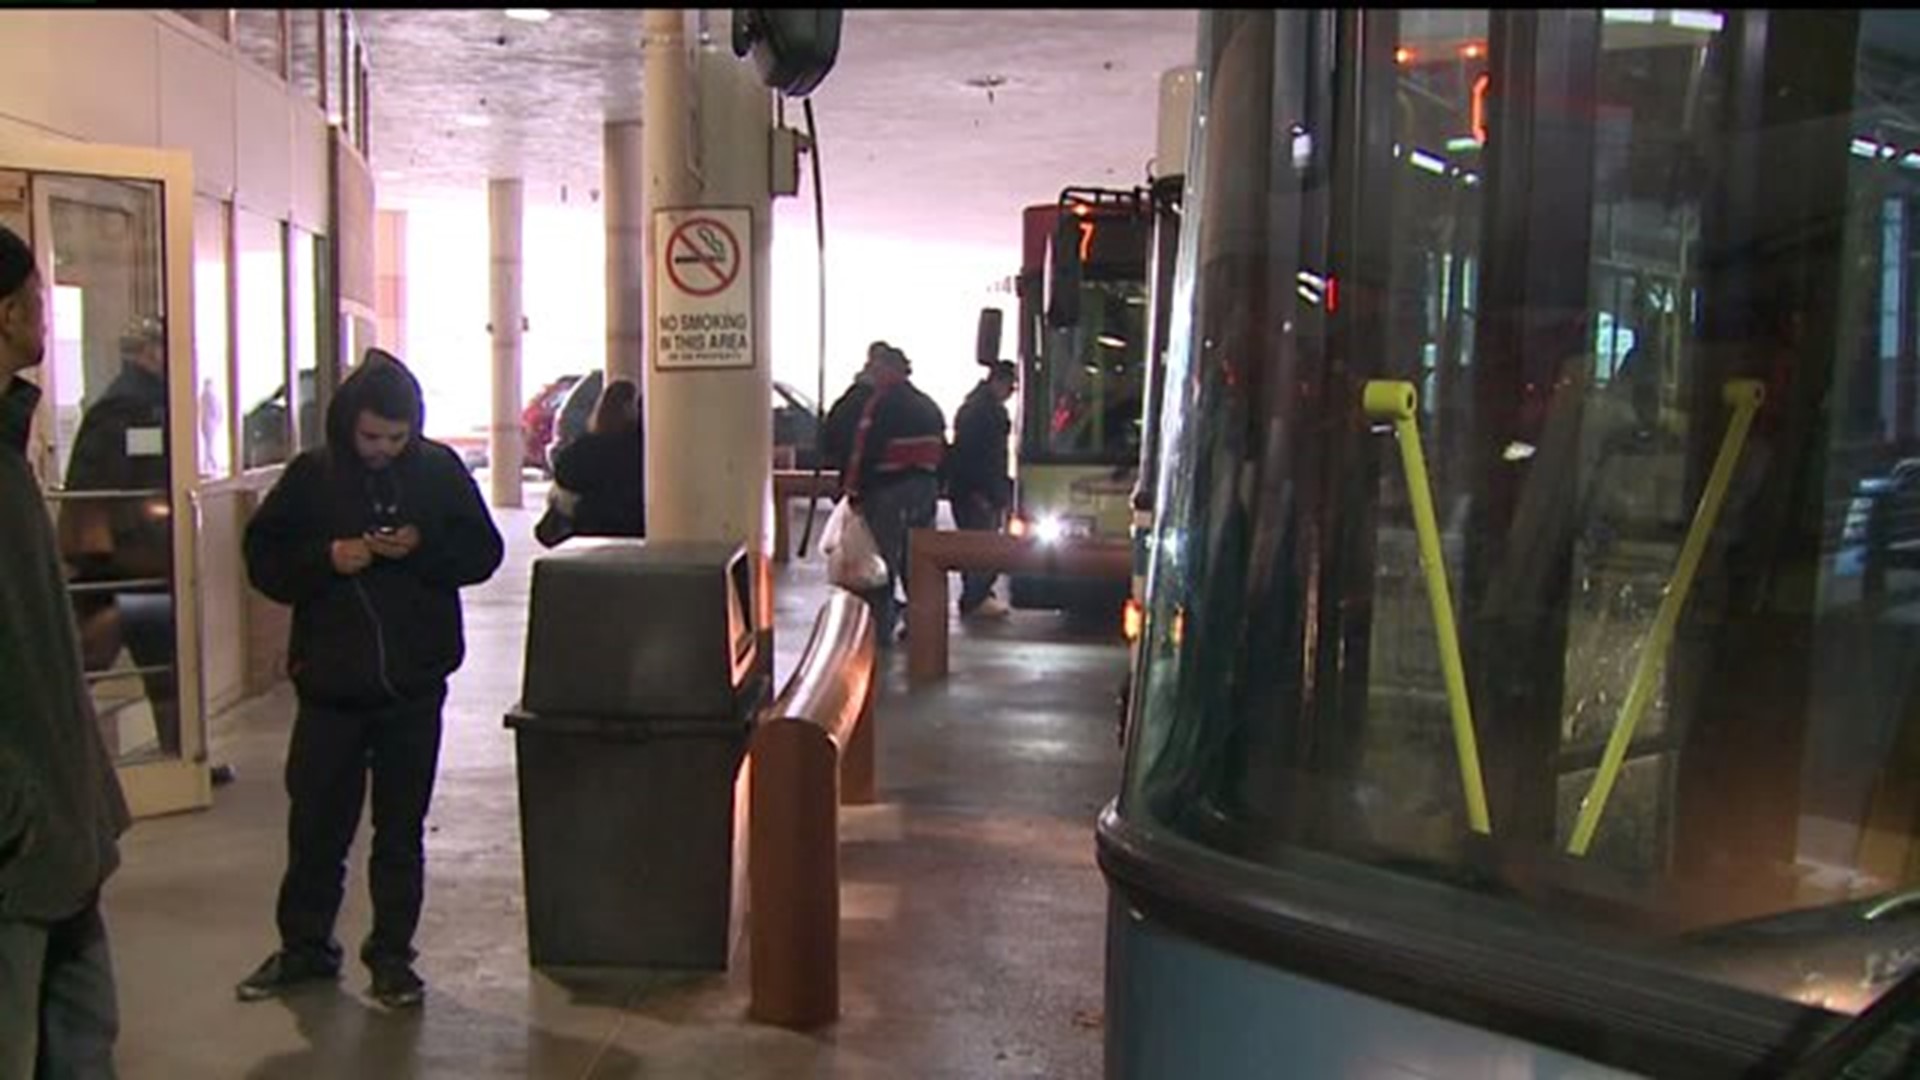 Davenport transit committee lists out priorities